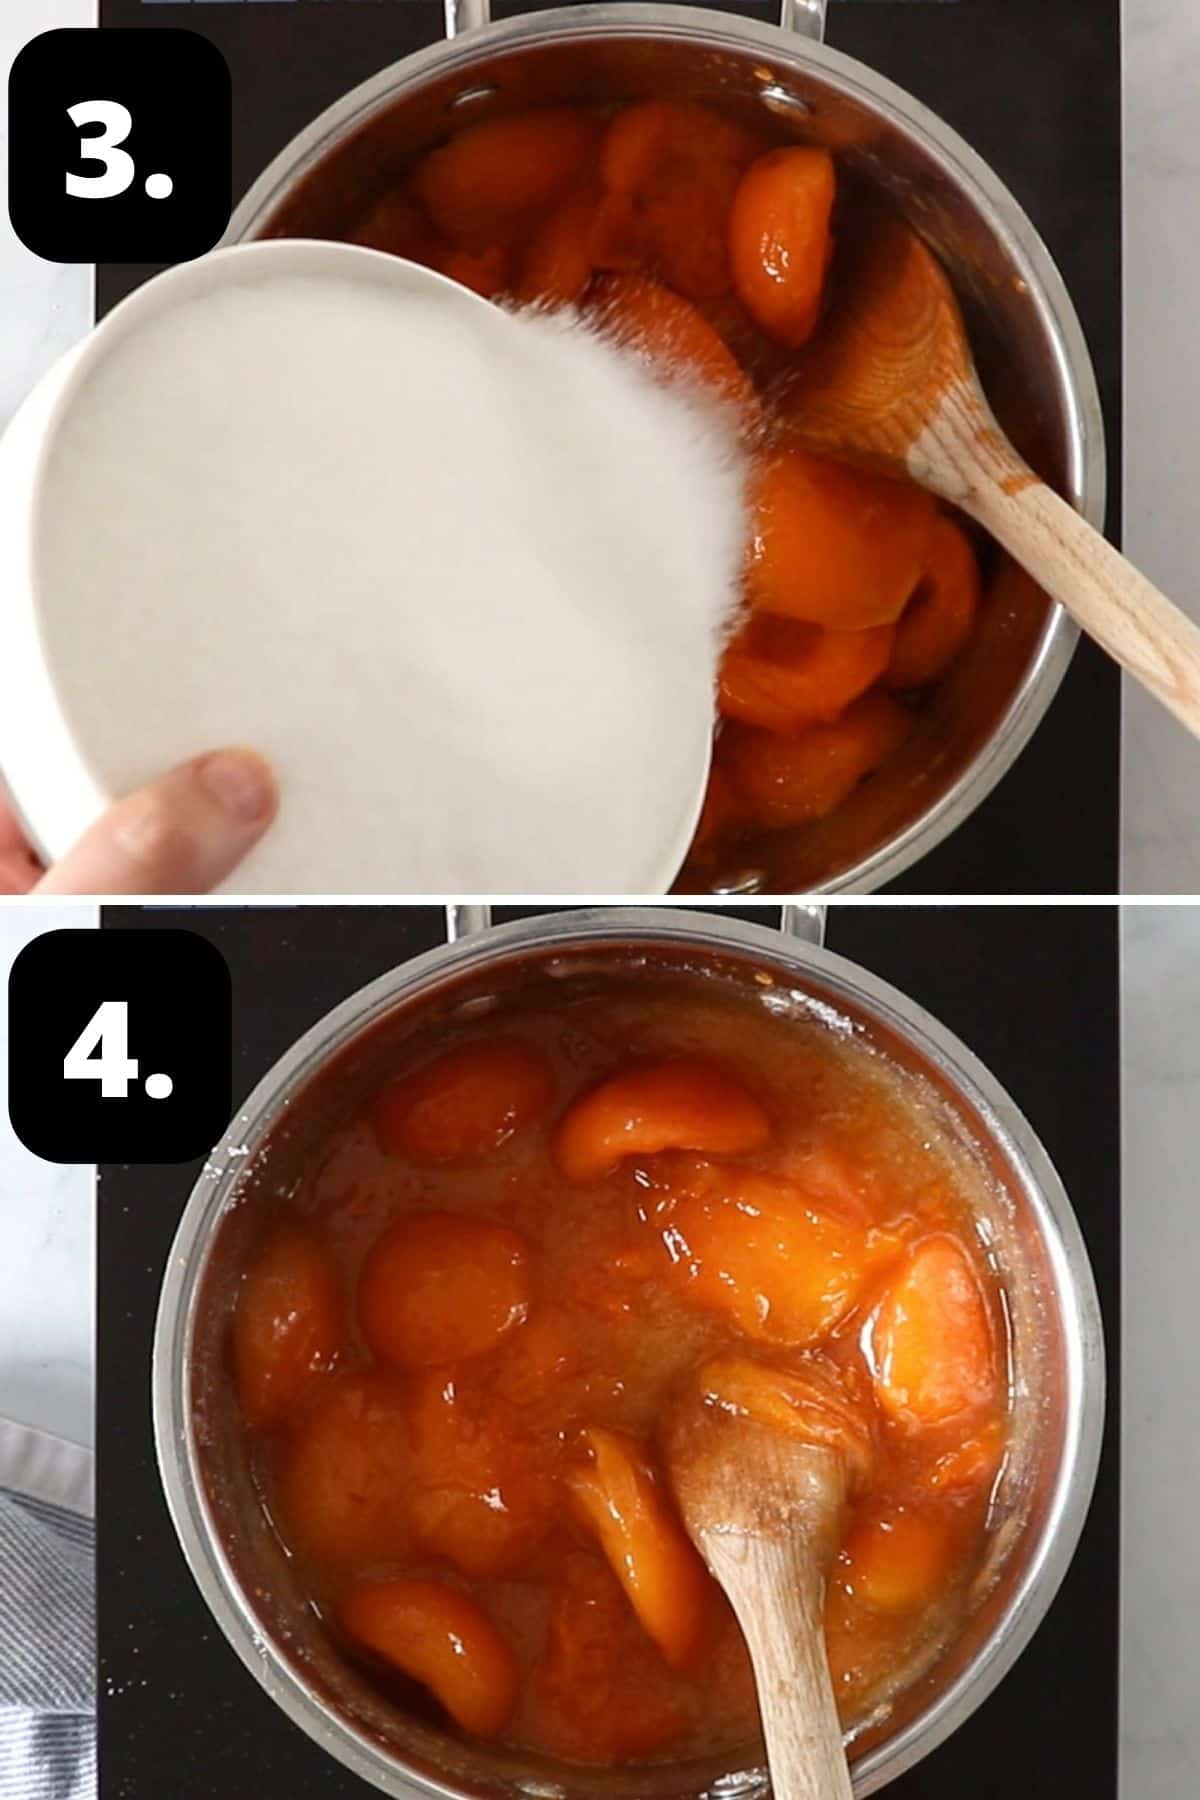 Steps 3-4 of preparing this recipe - adding the sugar to the apricots and stirring to disolve.